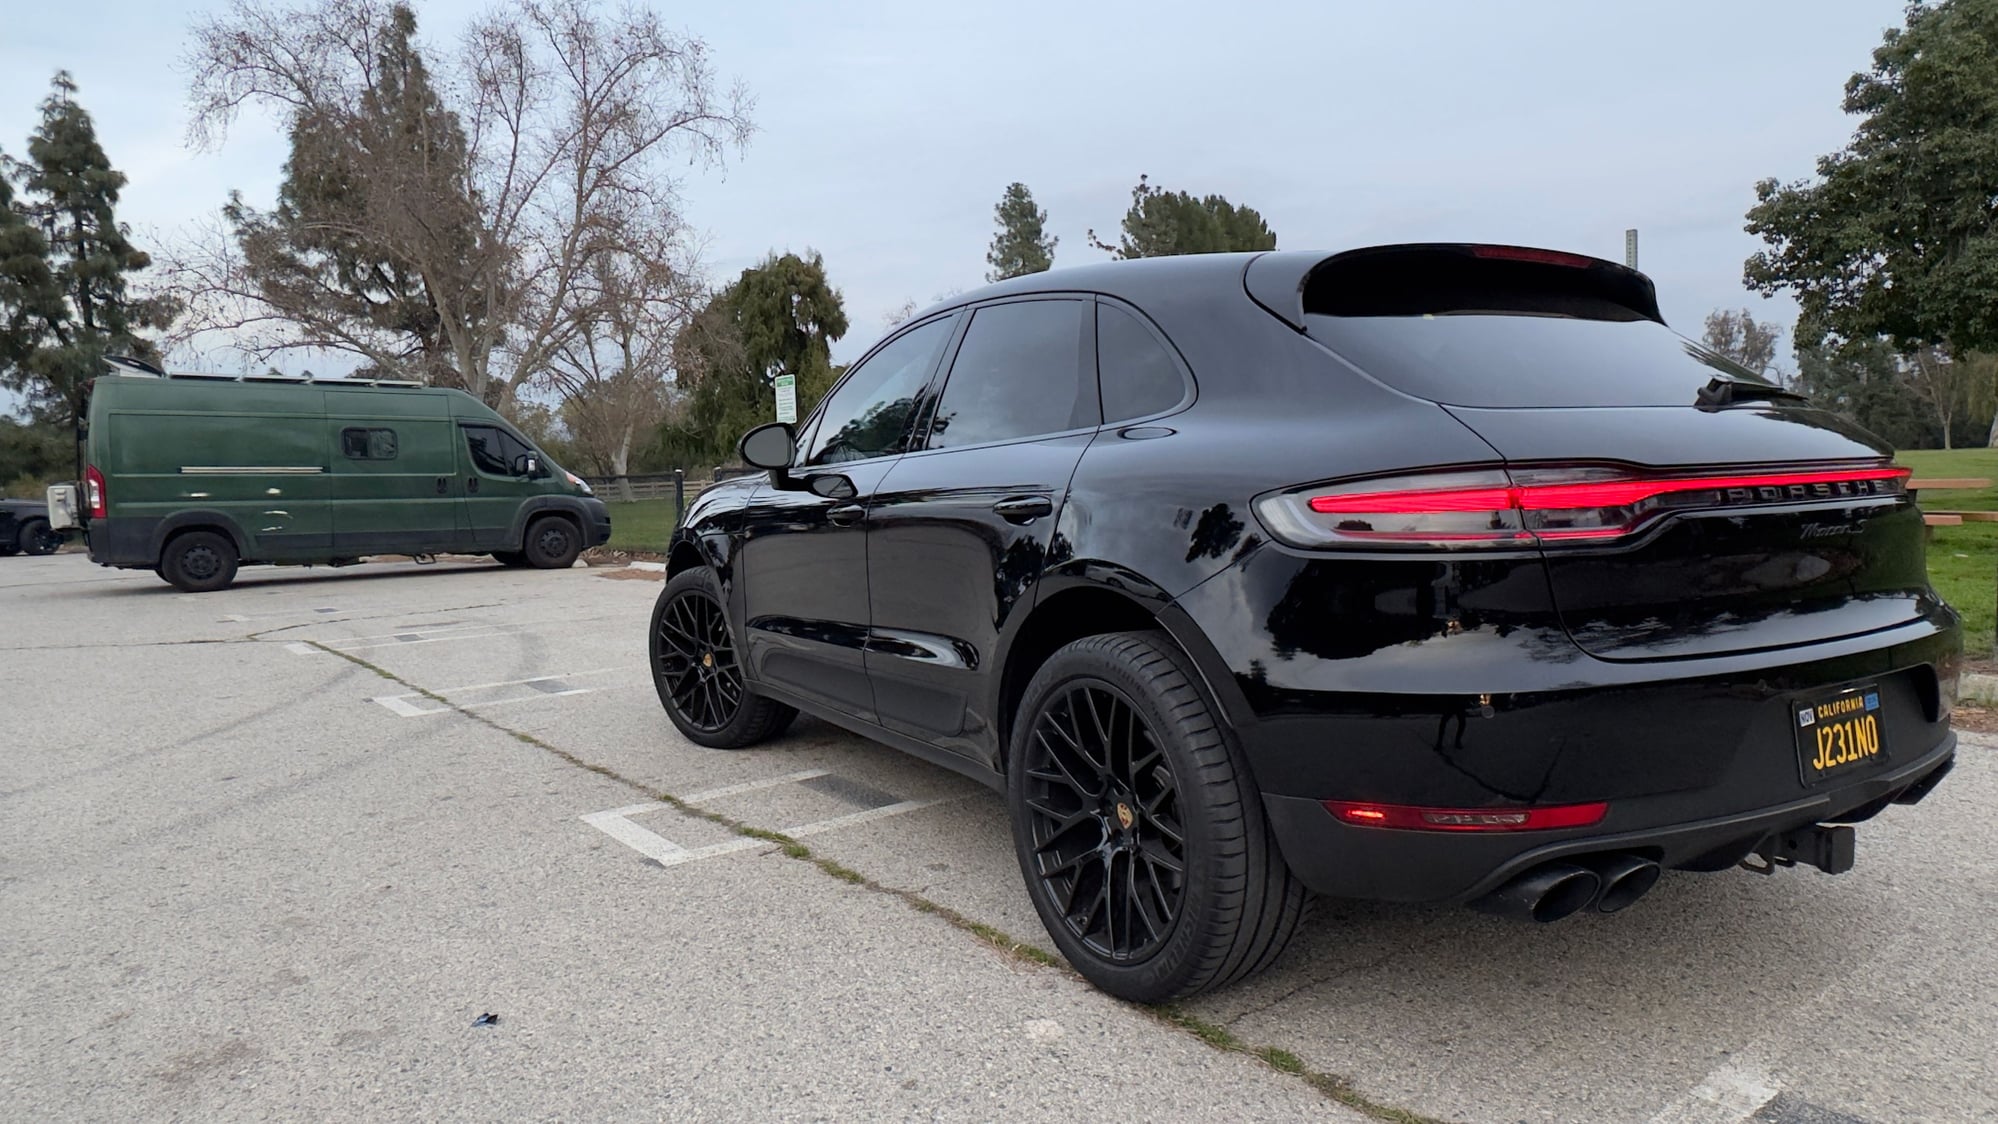 2019 Porsche Macan - 2019 Macan S CPO - Used - VIN Mint 2019 Macan S - 20,300 Miles - 6 cyl - 4WD - Automatic - SUV - Black - Los Angeles, CA 91436, United States